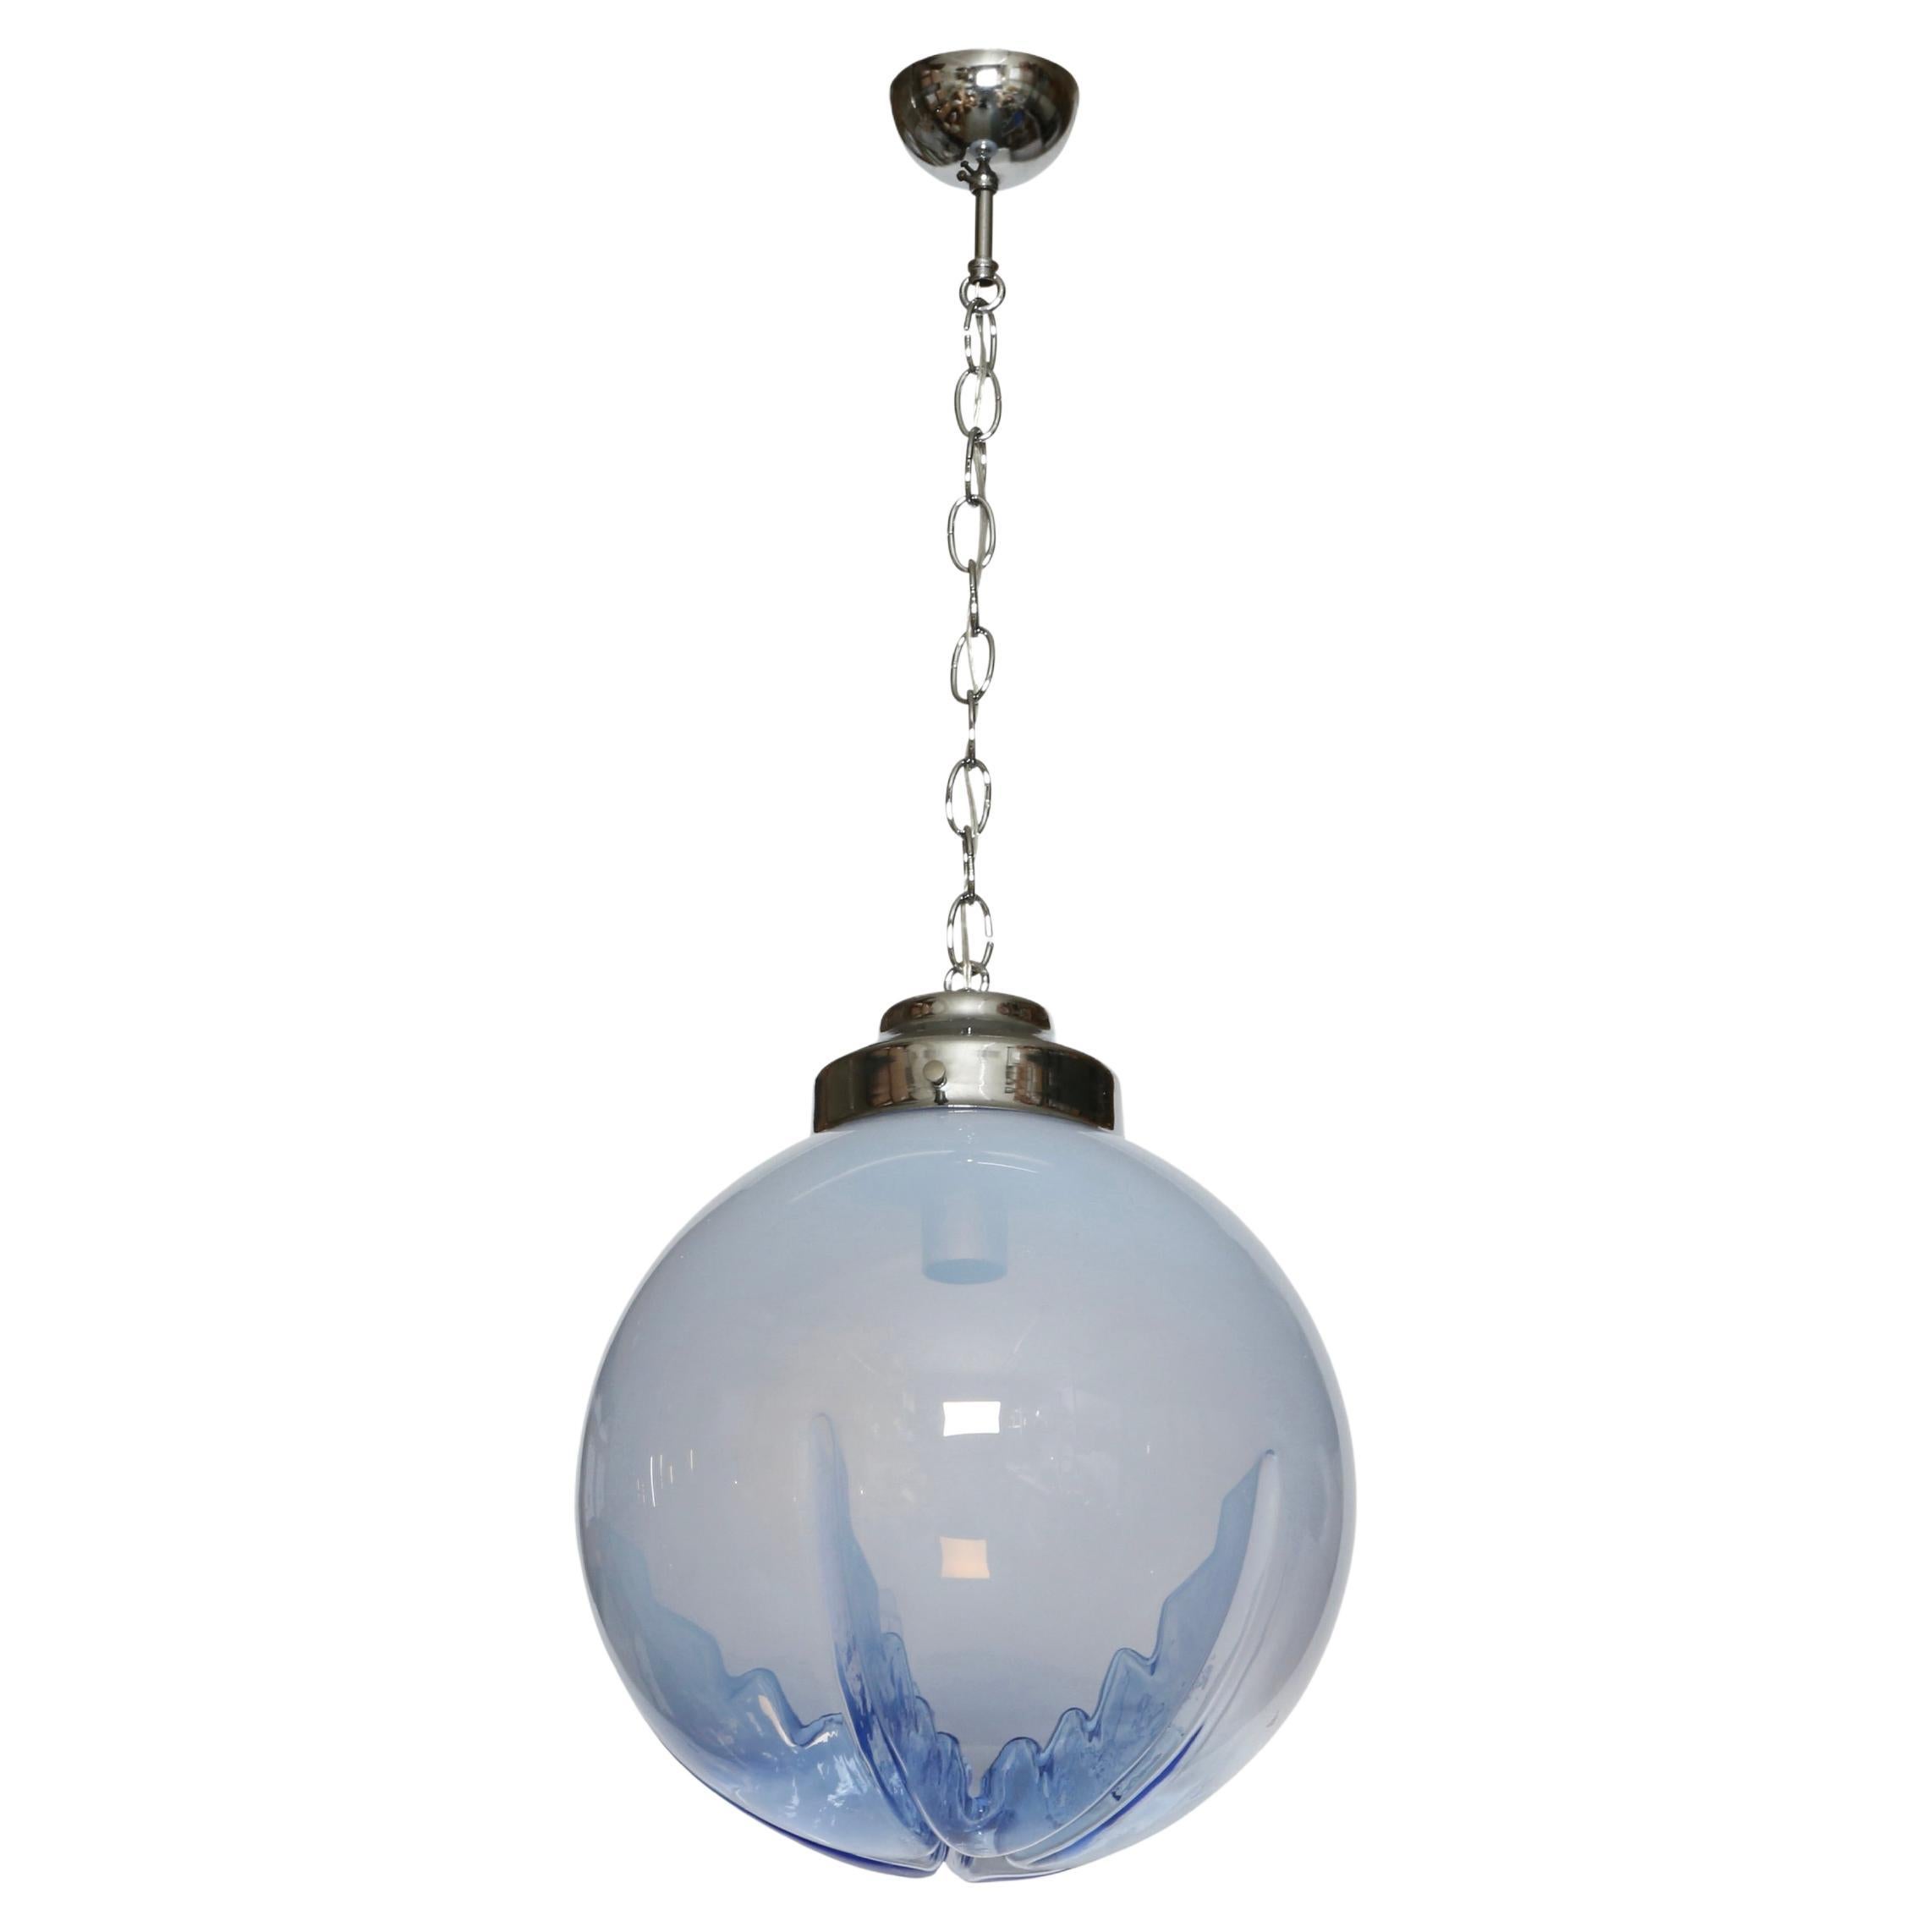 Murano glass ceiling pendant by Mazzega For Sale